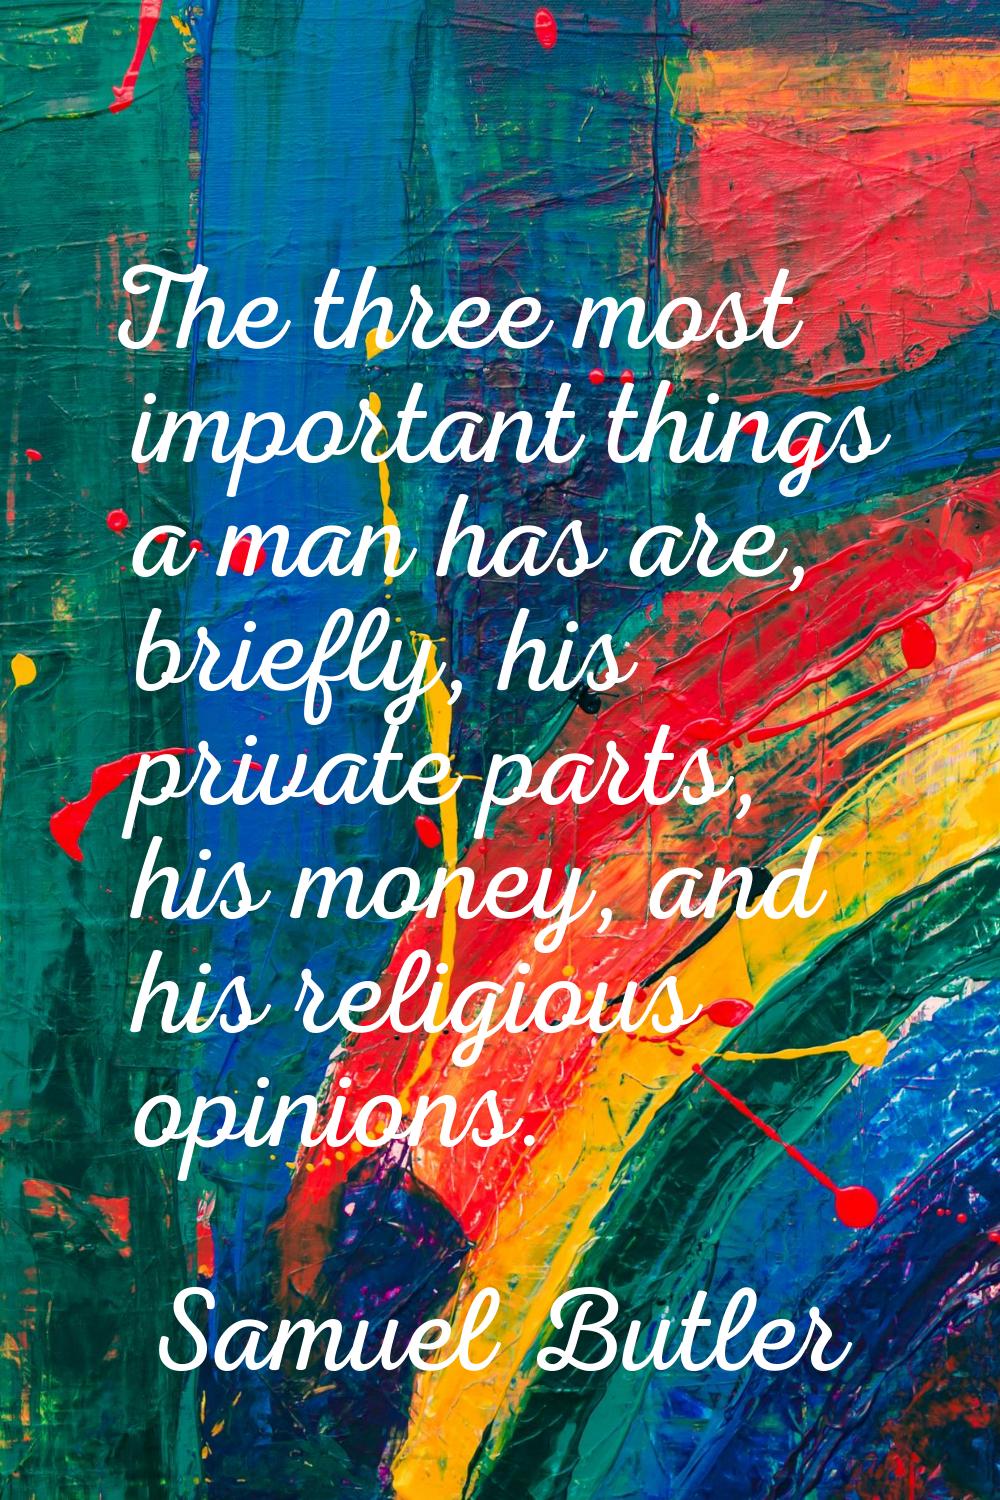 The three most important things a man has are, briefly, his private parts, his money, and his relig